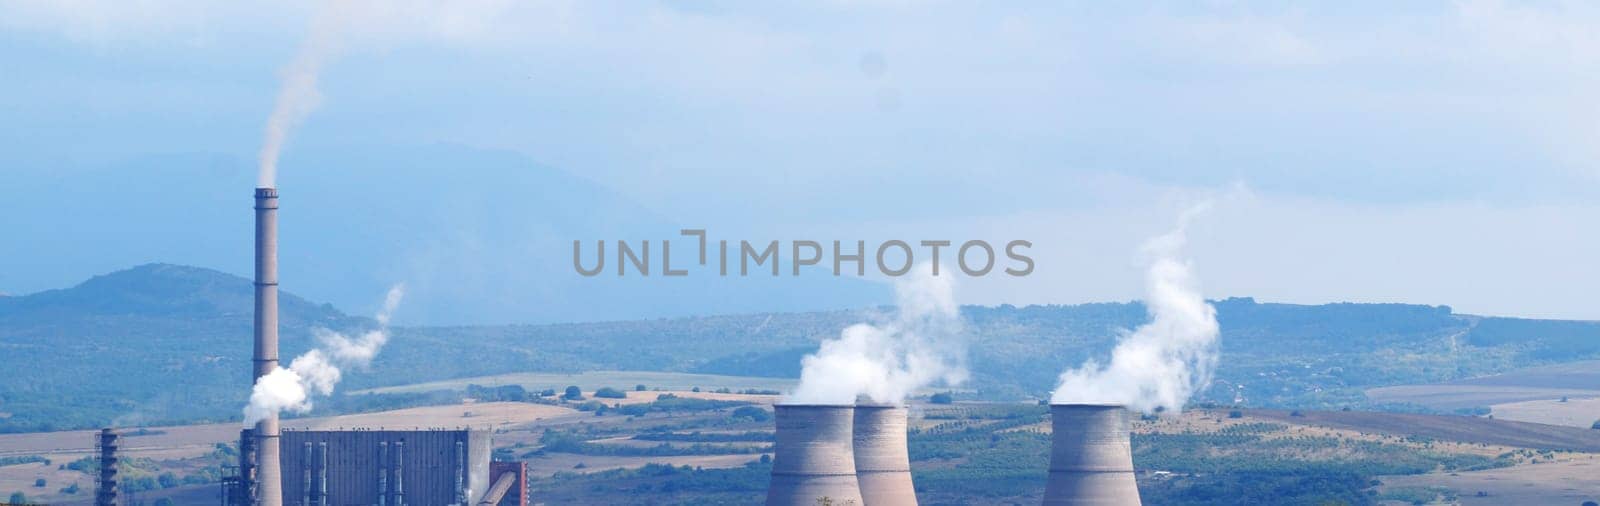 Smoking chimneys of a thermal power plant against the backdrop of fields and mountains, panoramic photo in blue tones